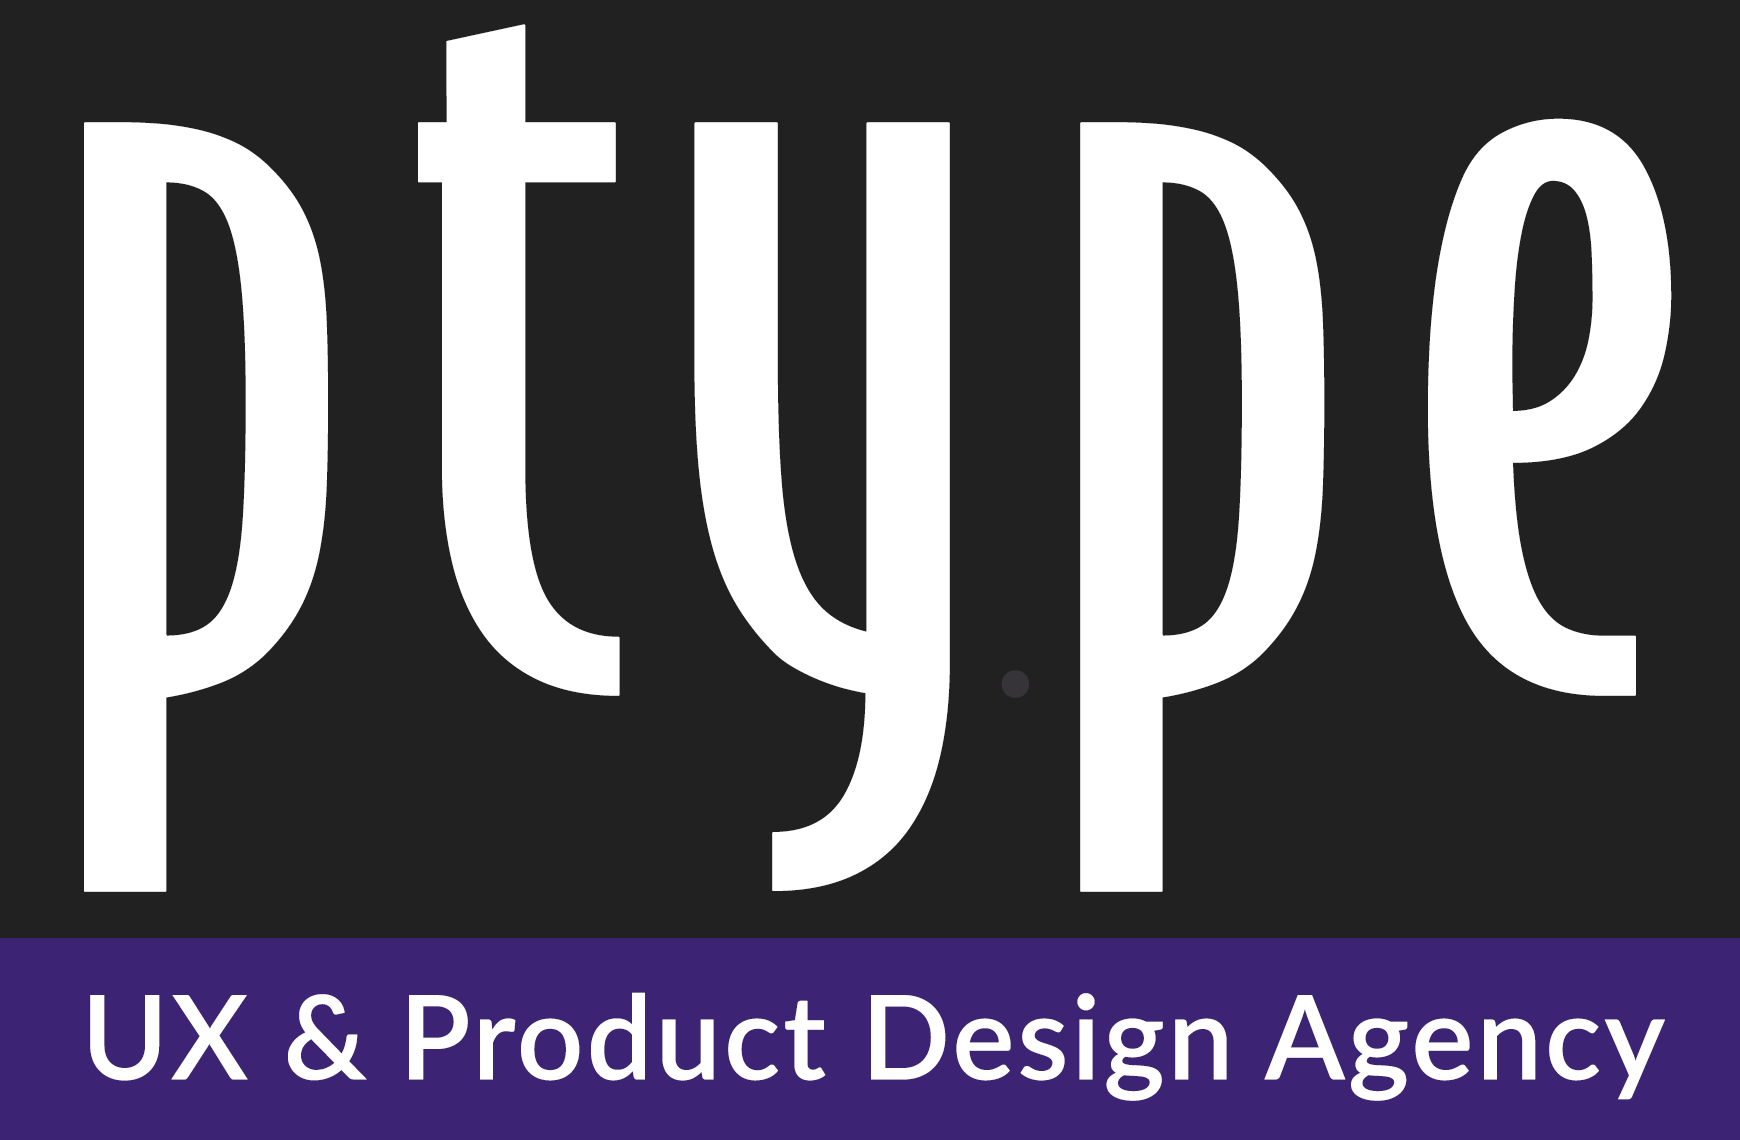 Ptype UX & Product Design Agency Qualified.One in San Francisco